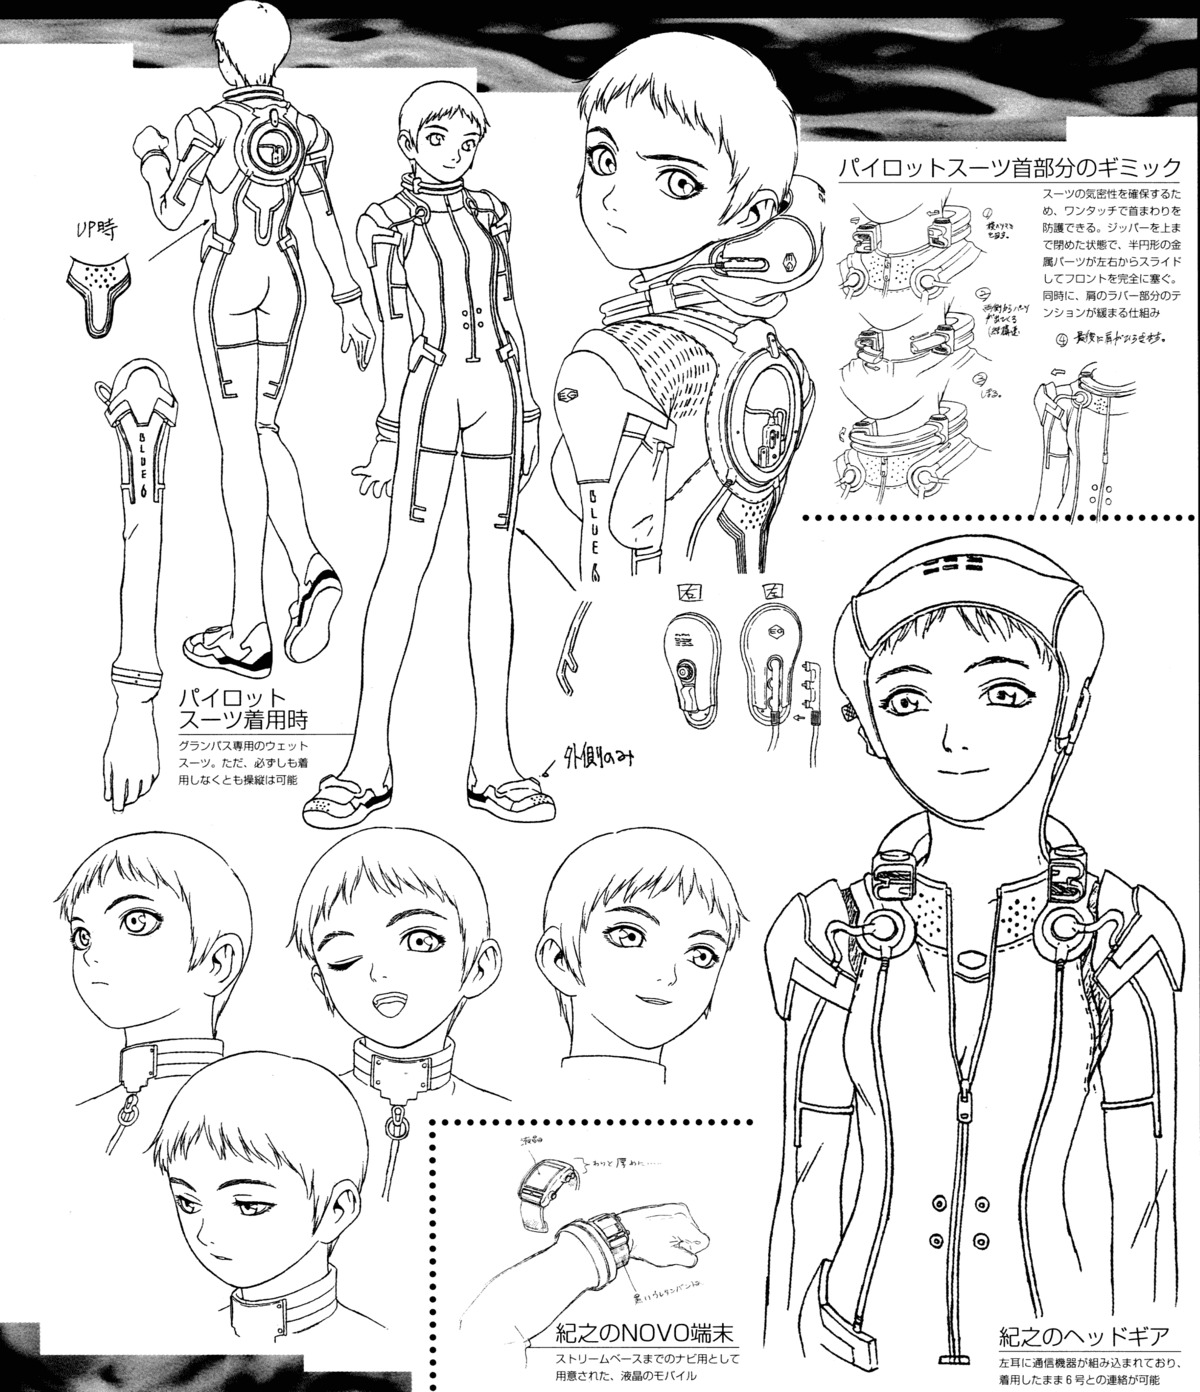 artist_unknown blue_submarine_no_6 character_design production_materials settei